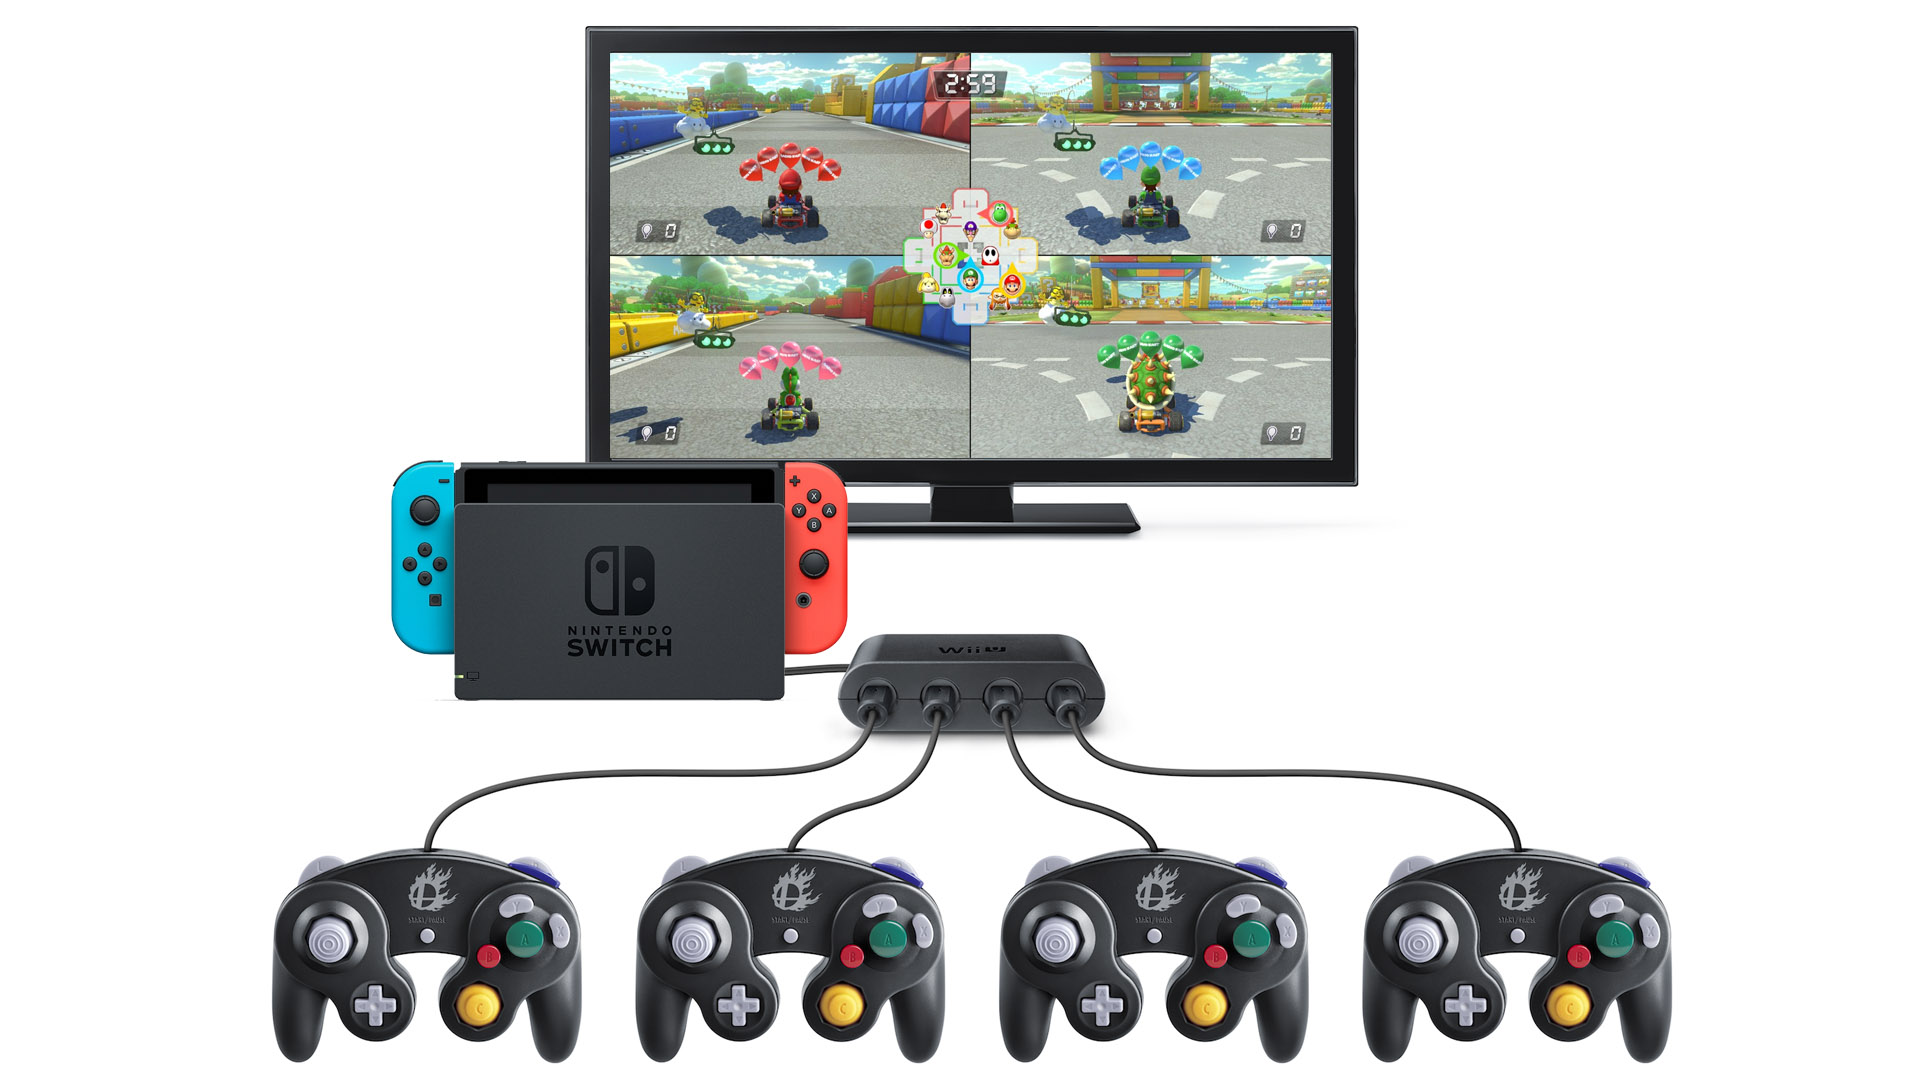 can you use gamecube controller for mario kart switch